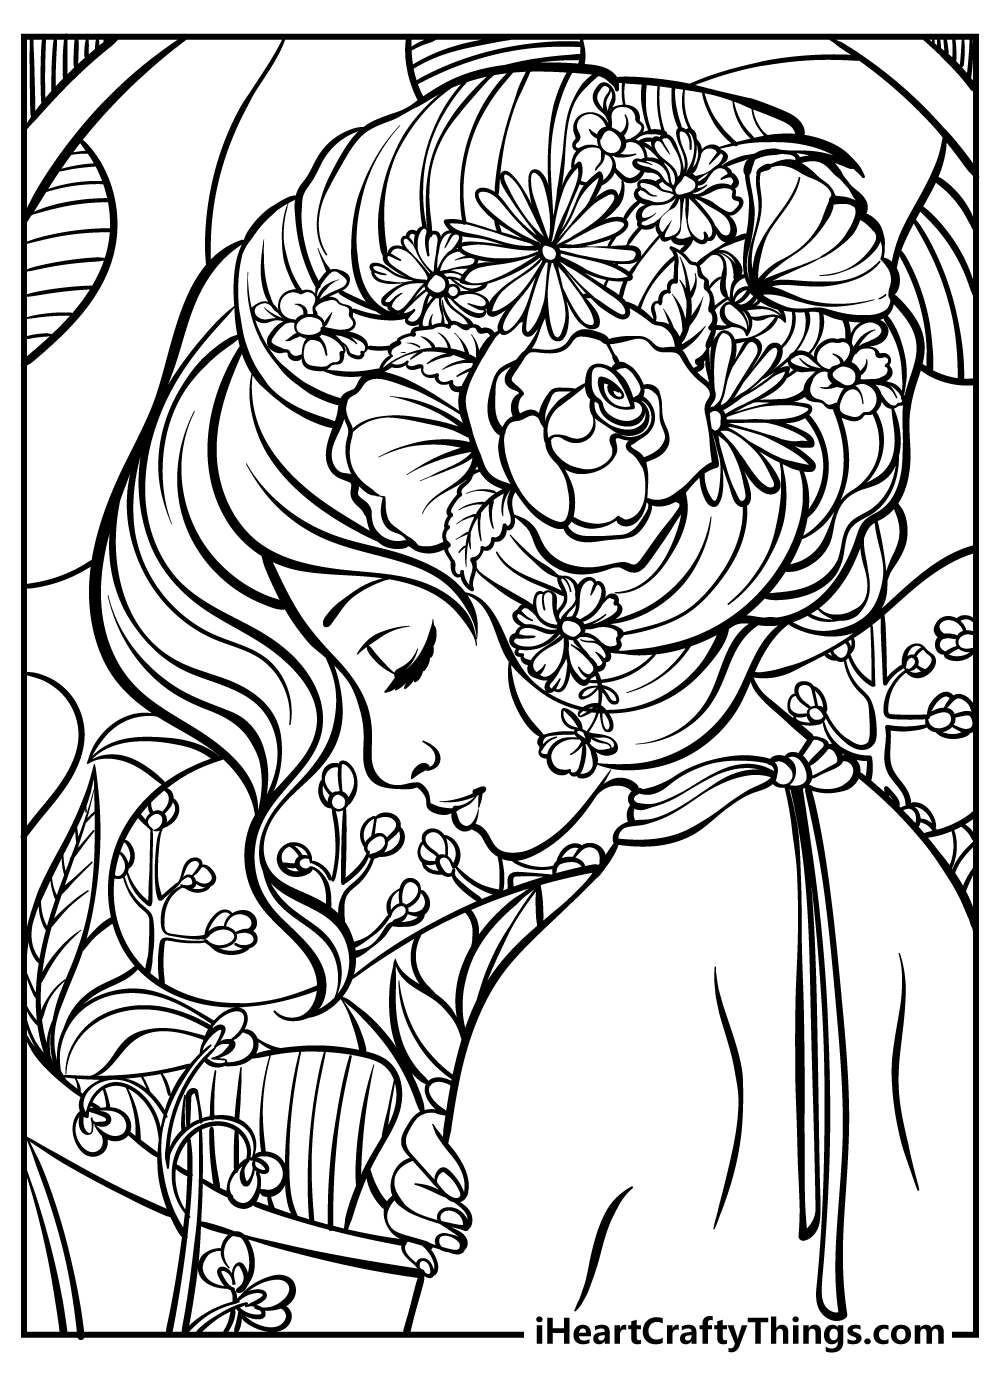 Adult Coloring Pages free